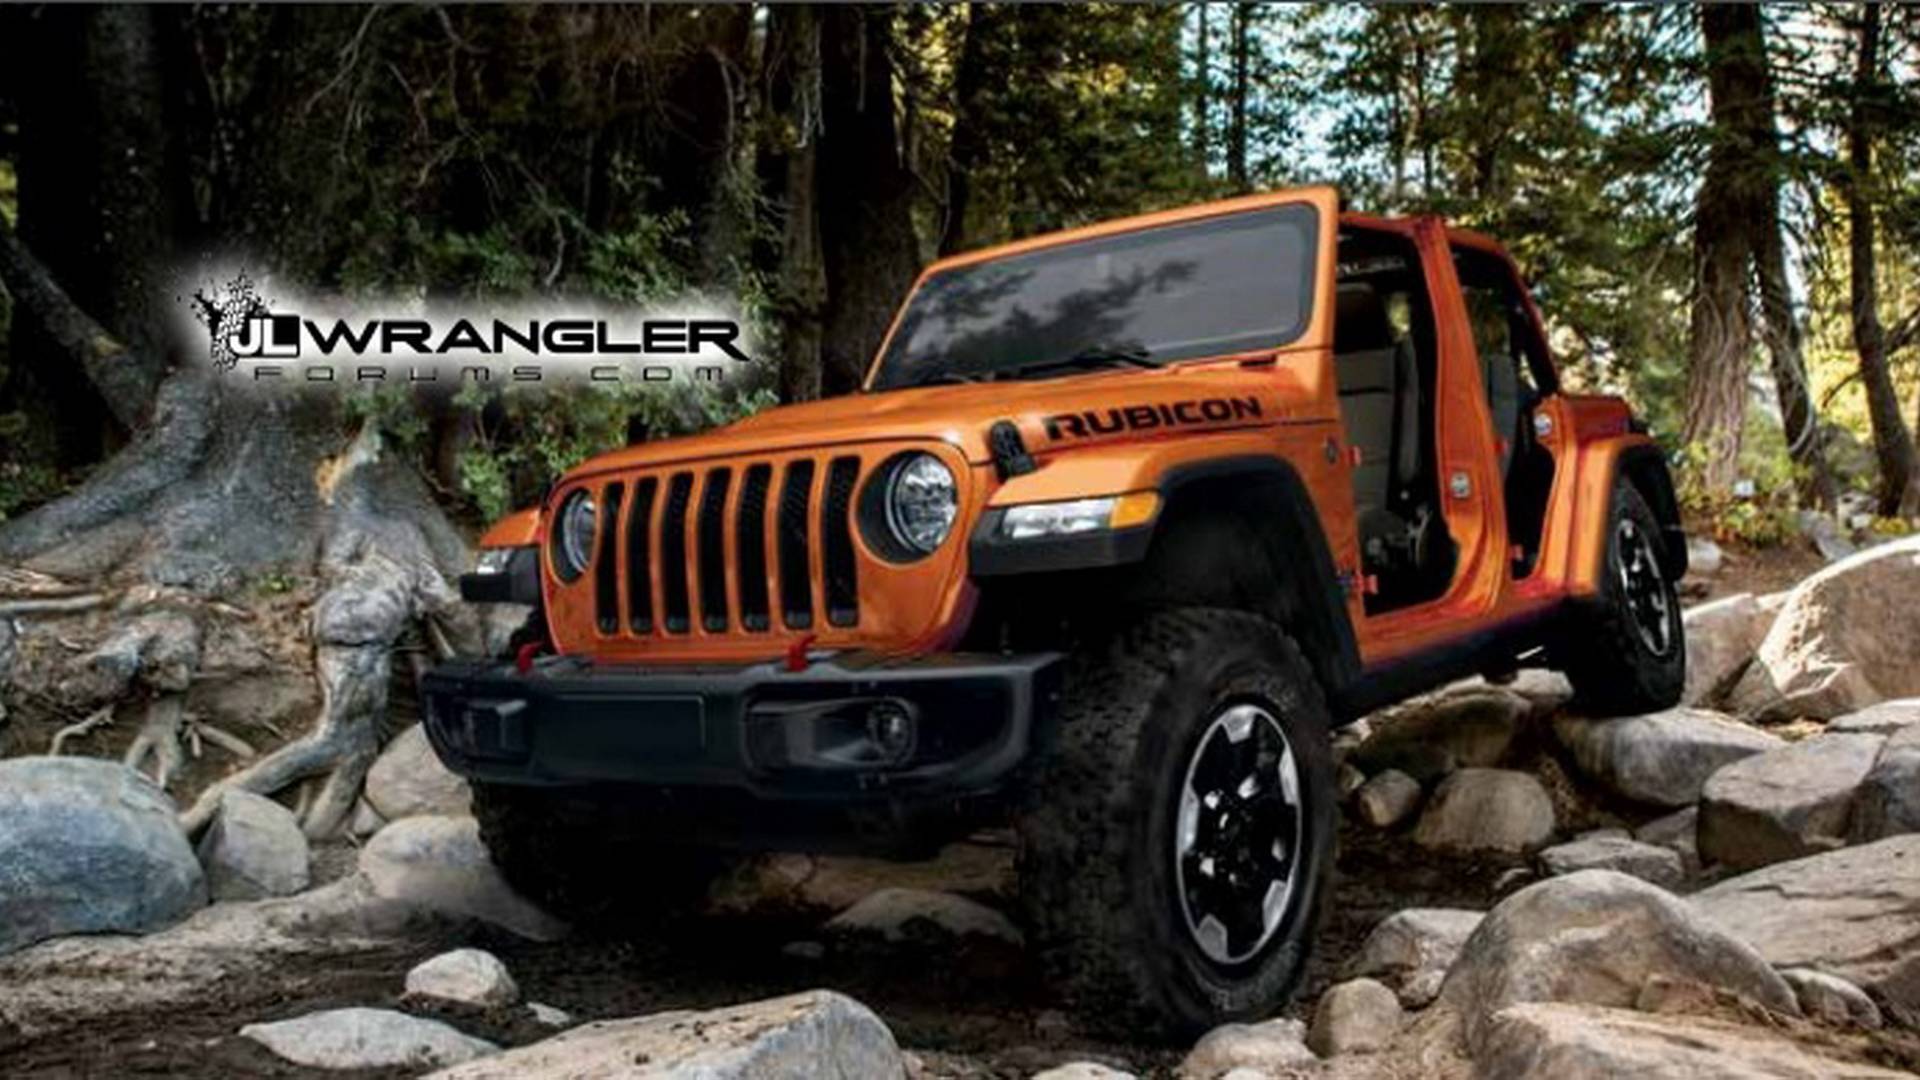 Jeep Wrangler Owner’s Manual, User Guide Emerge Onto The Web